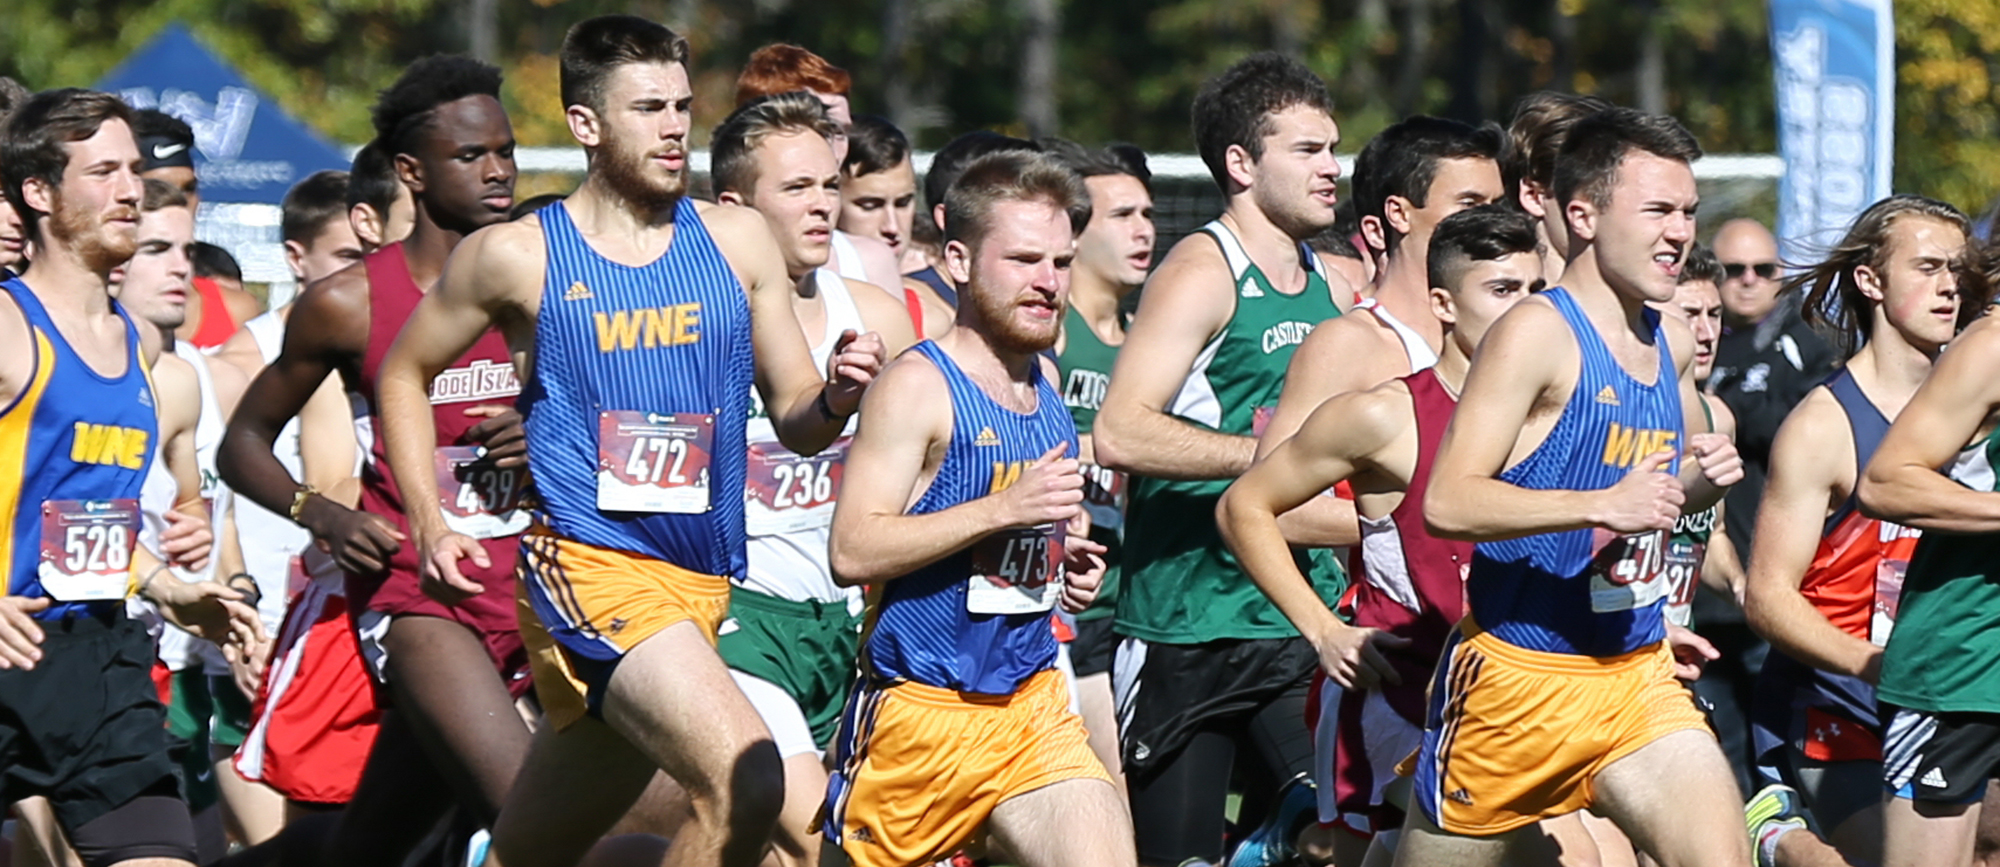 Western New England placed 38th at the NCAA New England Regional Championship on Saturday. (Photo by Chris Marion)